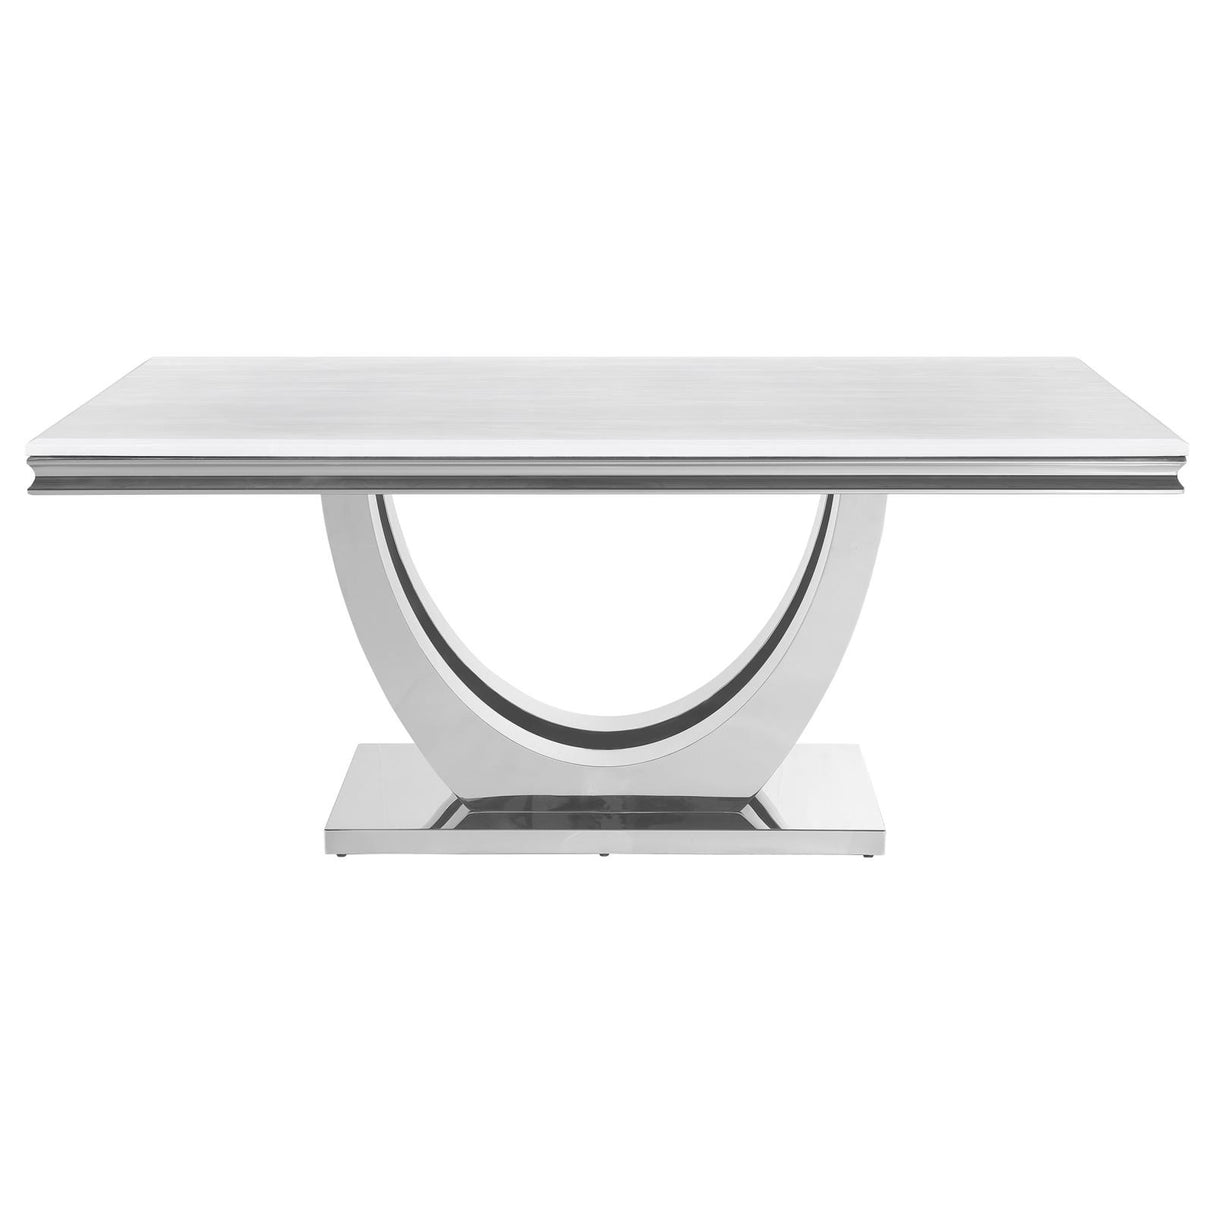 Kerwin Rectangle Faux Marble Top Dining Table White and Chrome - 111101 - Luna Furniture